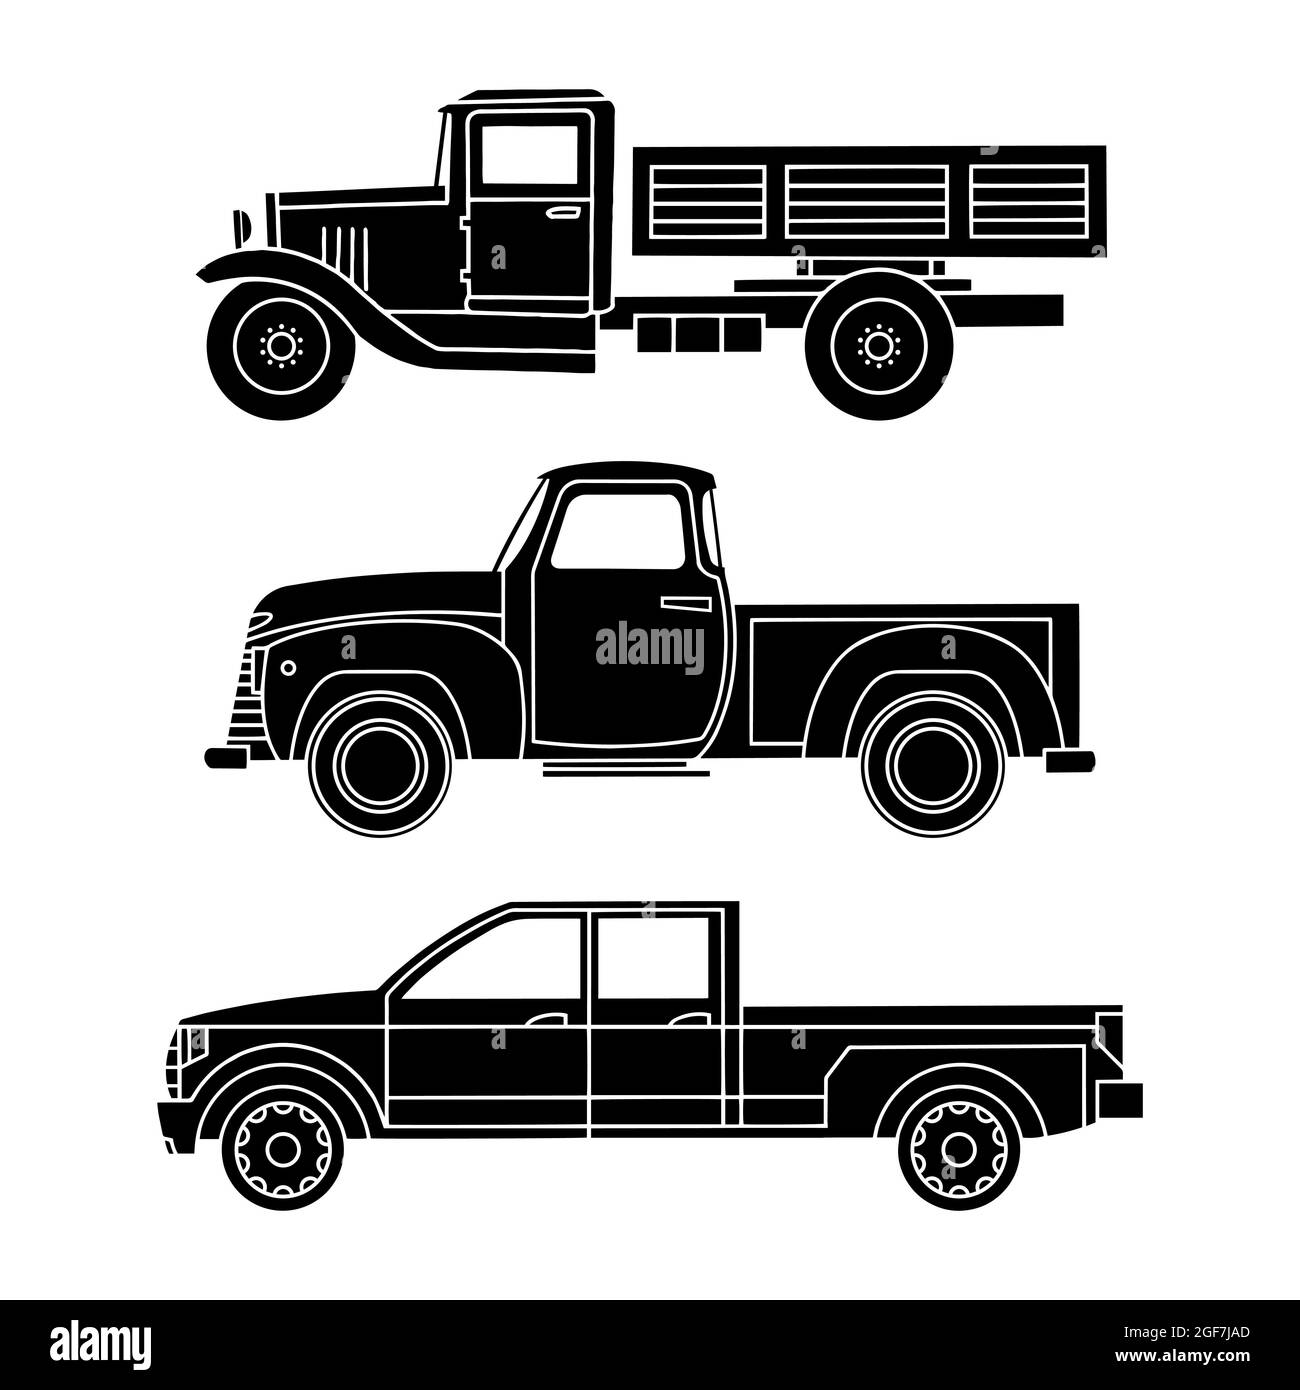 Silhouettes of black vintage cars. Trucks and SUVs. Vector illustration Stock Vector